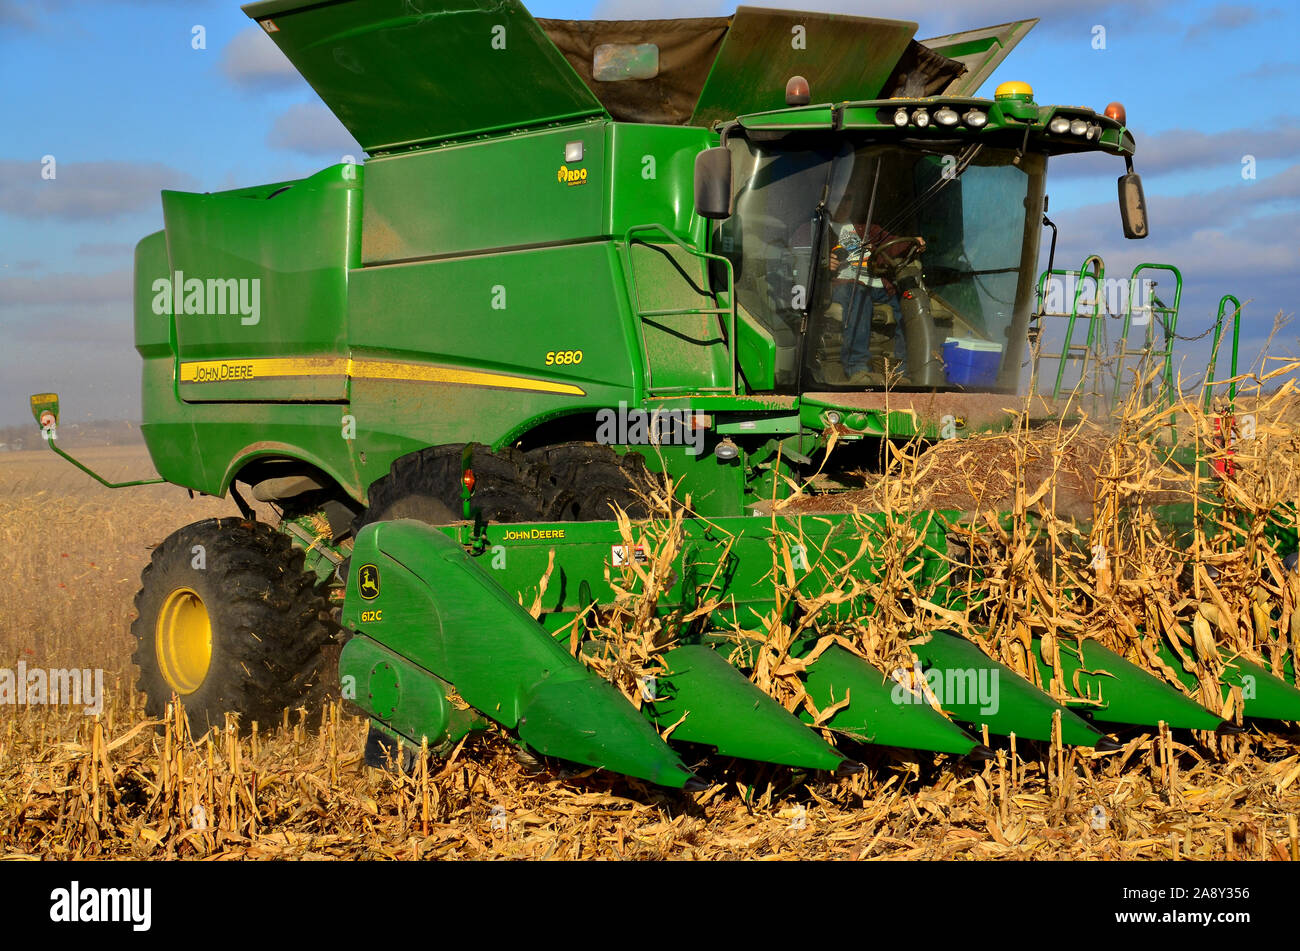 November 7, 2019  Rural Burleigh county in South central North Dakota. Farmers using combines and related machinery harvest this years corn crop. Stock Photo